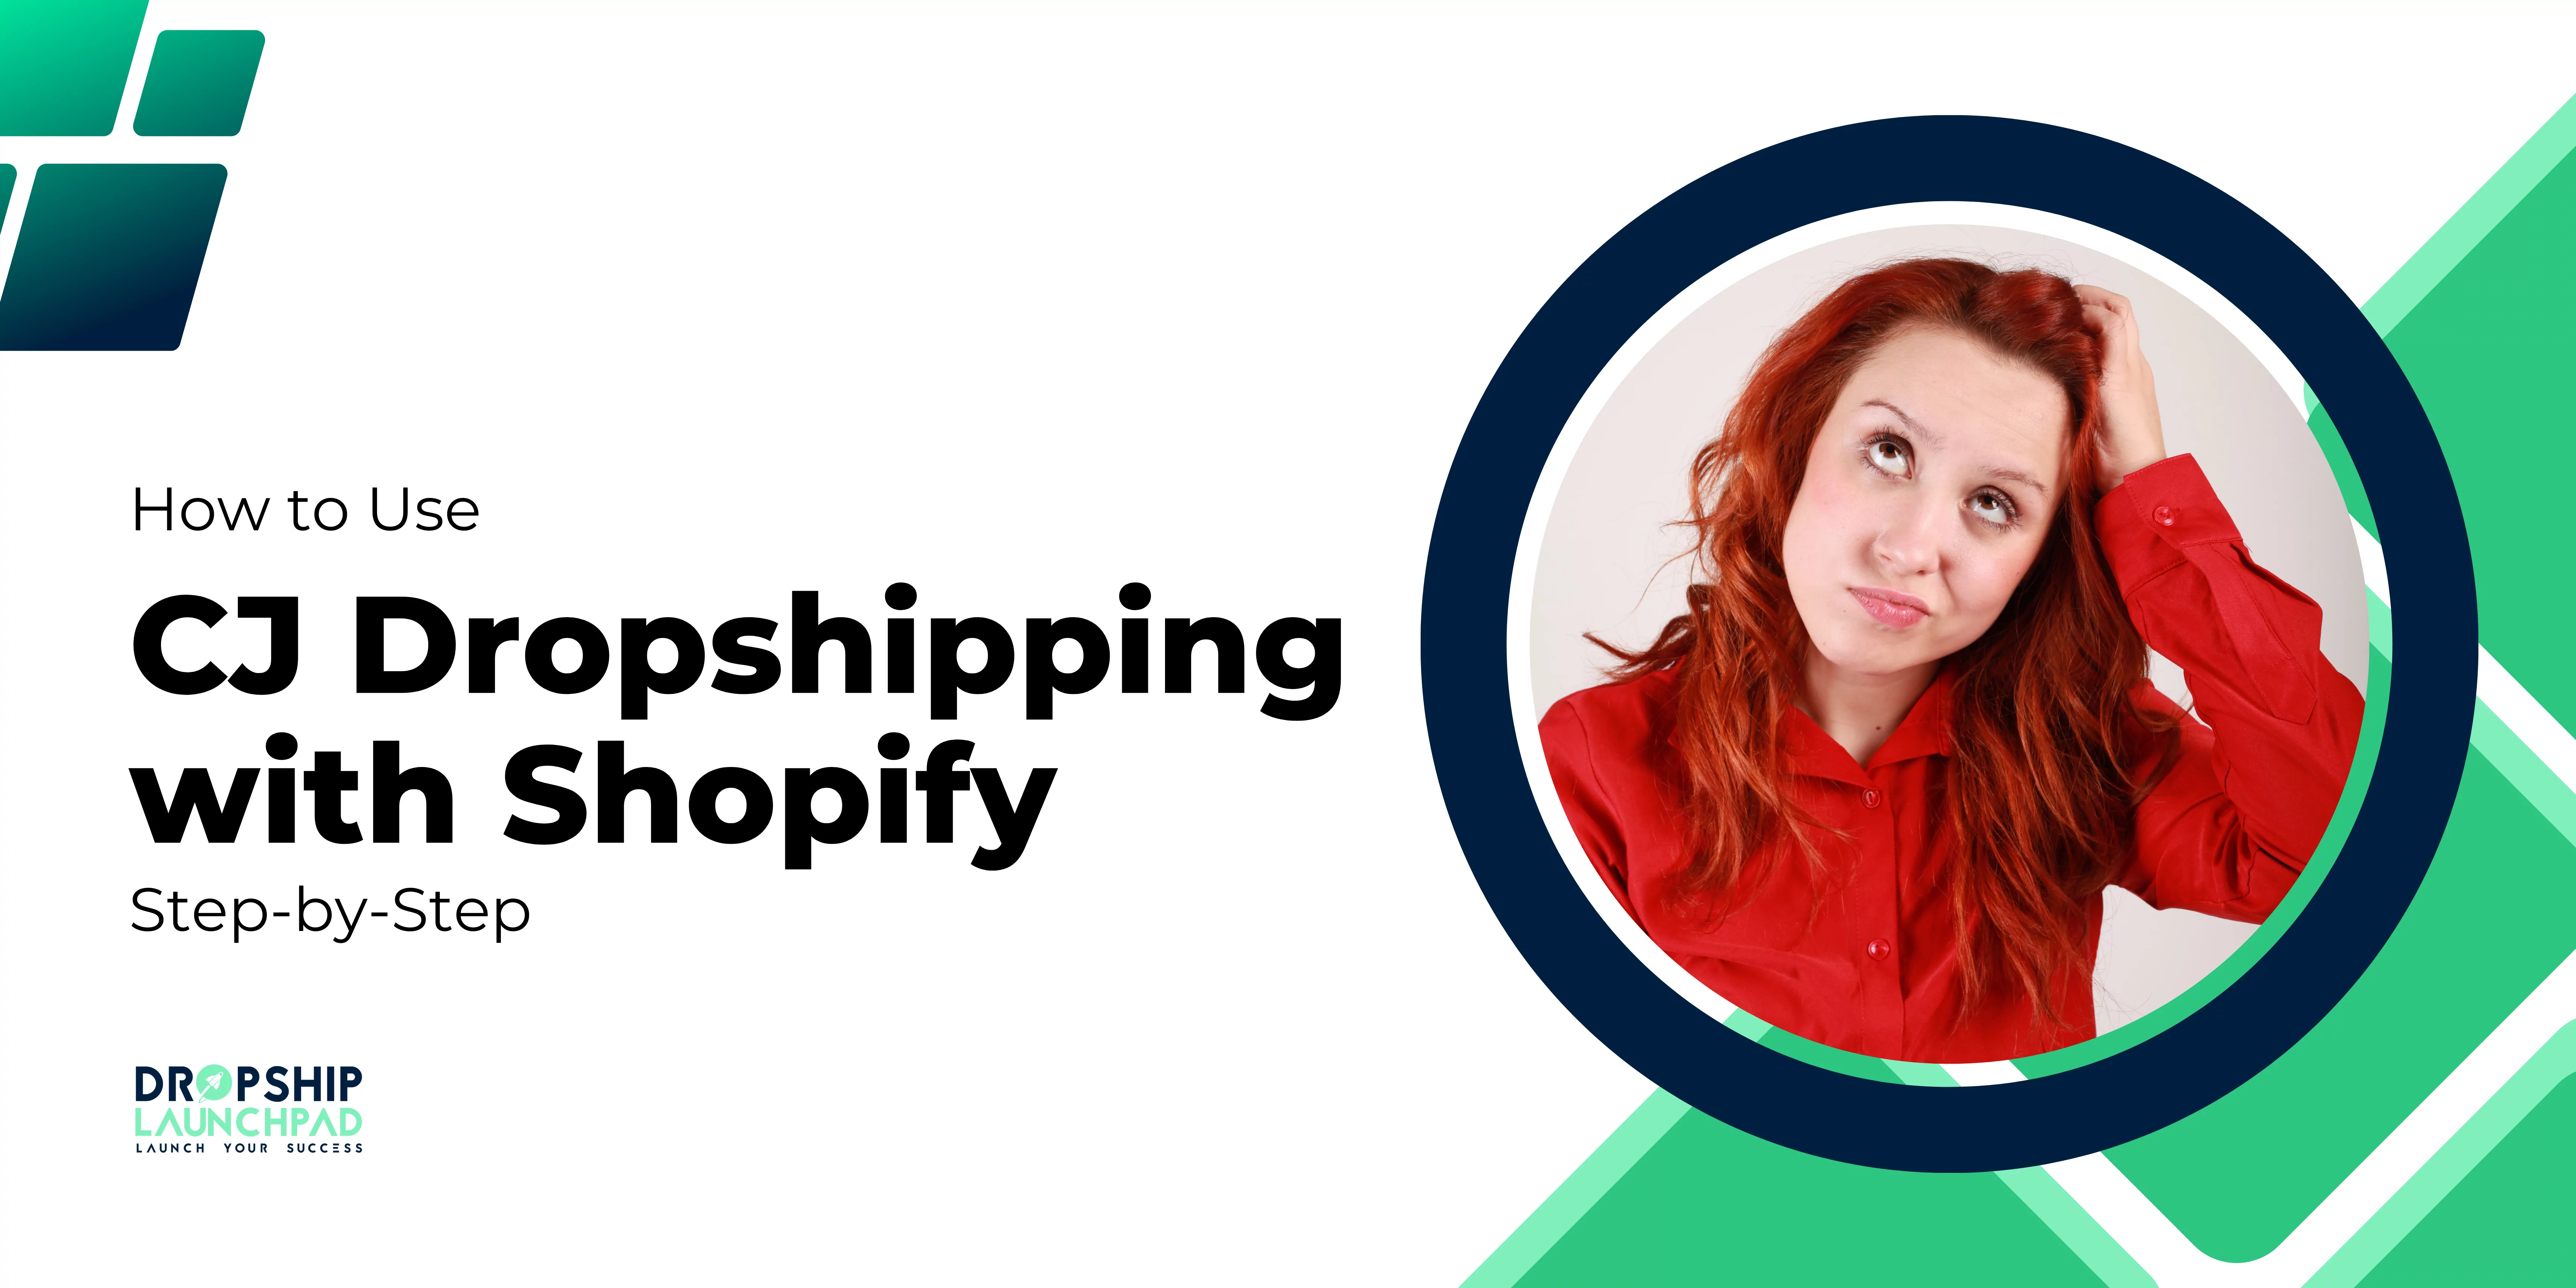 How to Use CJ Dropshipping with Shopify Step-by-Step